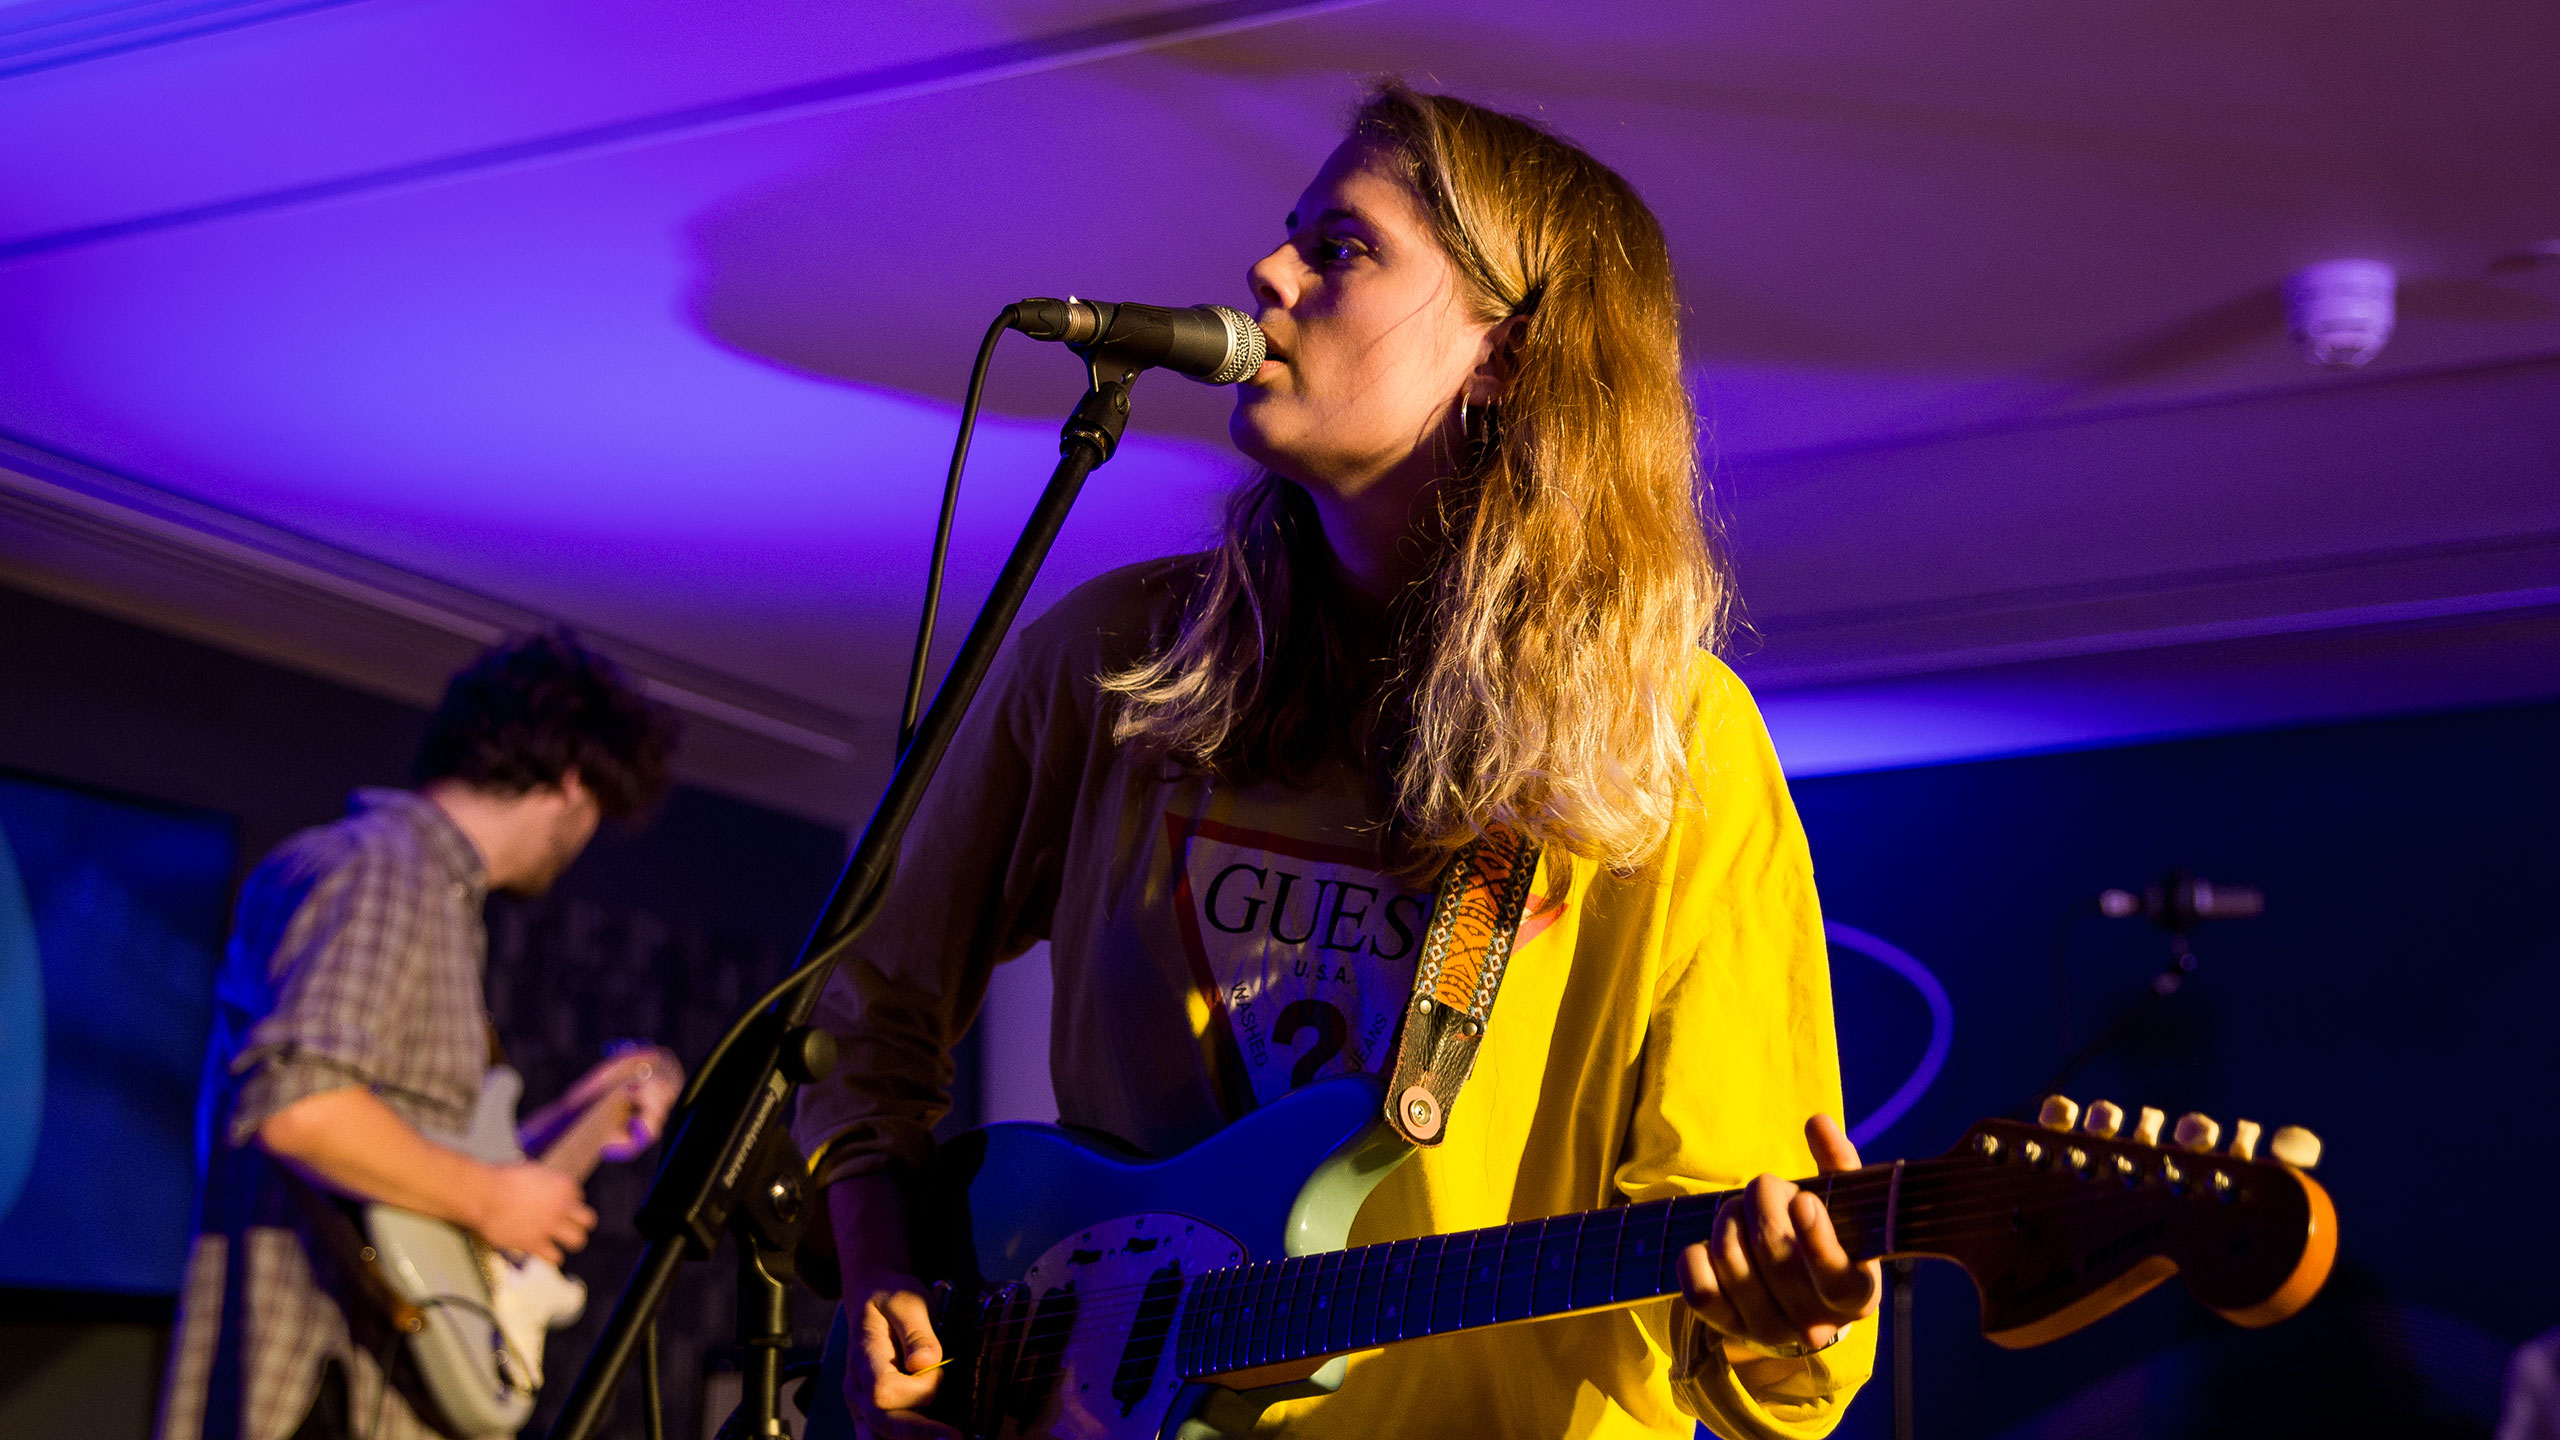 Marika Hackman plays guitar and sings, wearing a yellow shirt, on stage at PRS for Music Presents